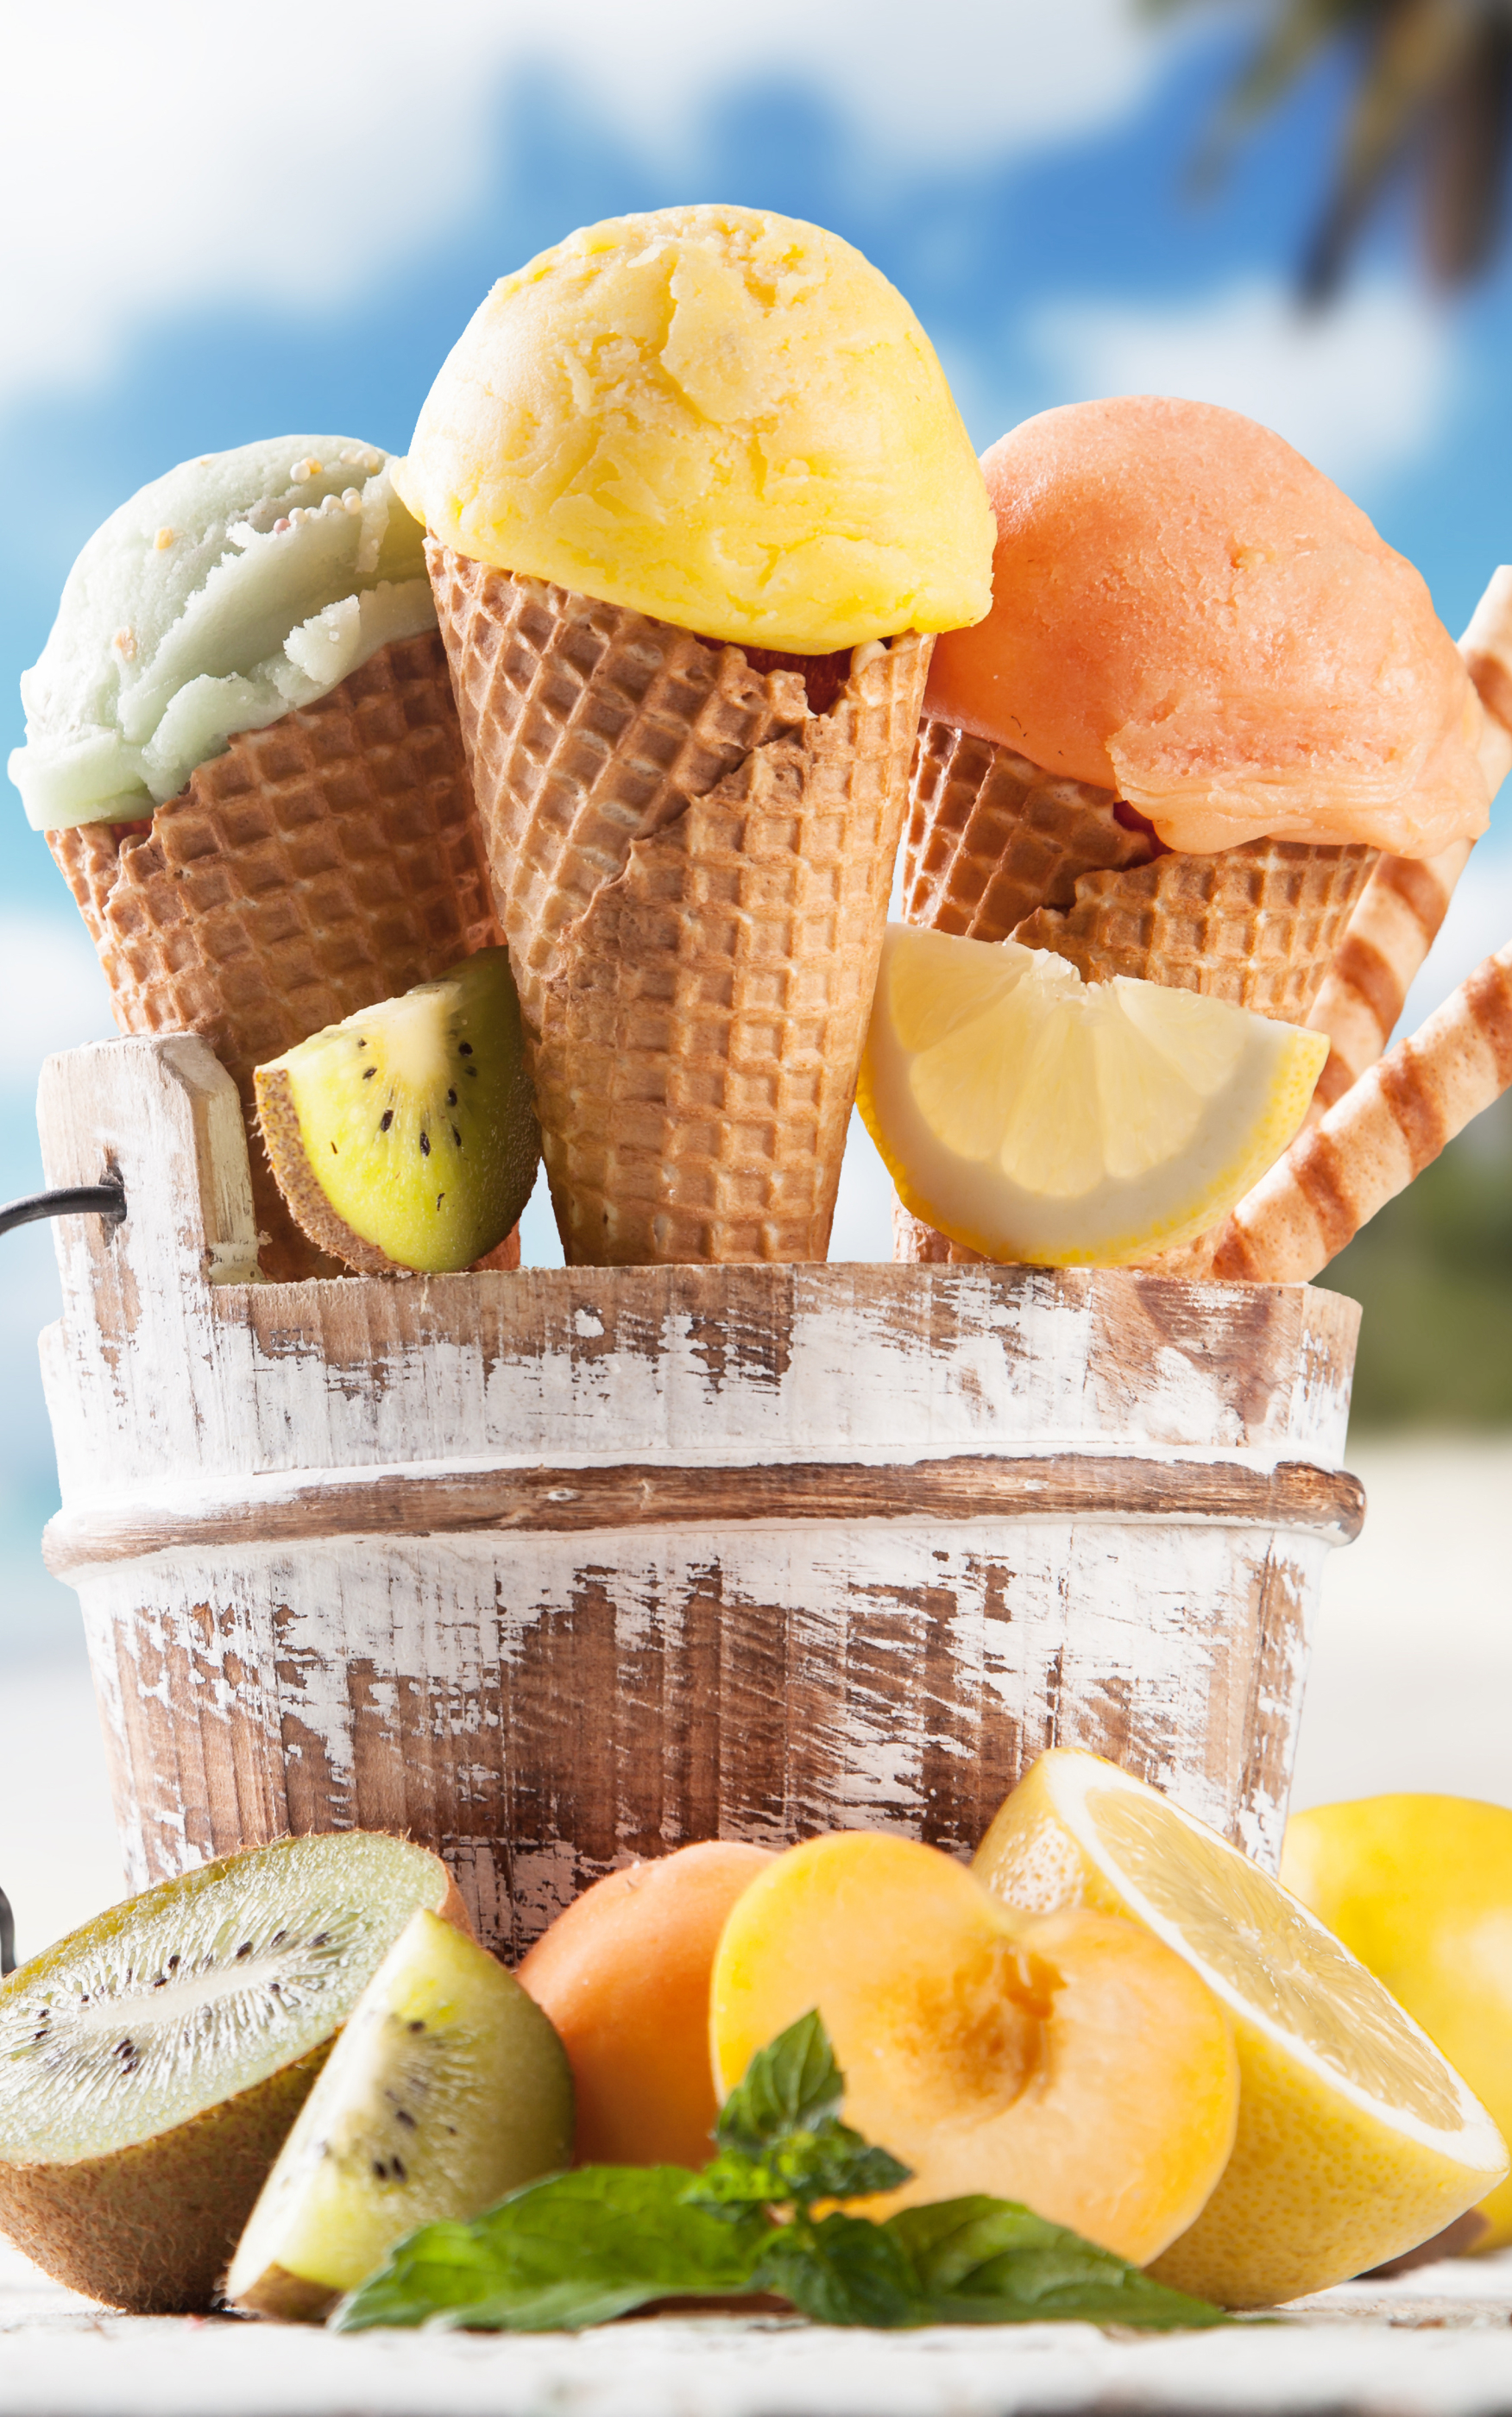 Download wallpaper 1280x2120 ice cream waffle cones summer iphone 6  plus 1280x2120 hd background 5114